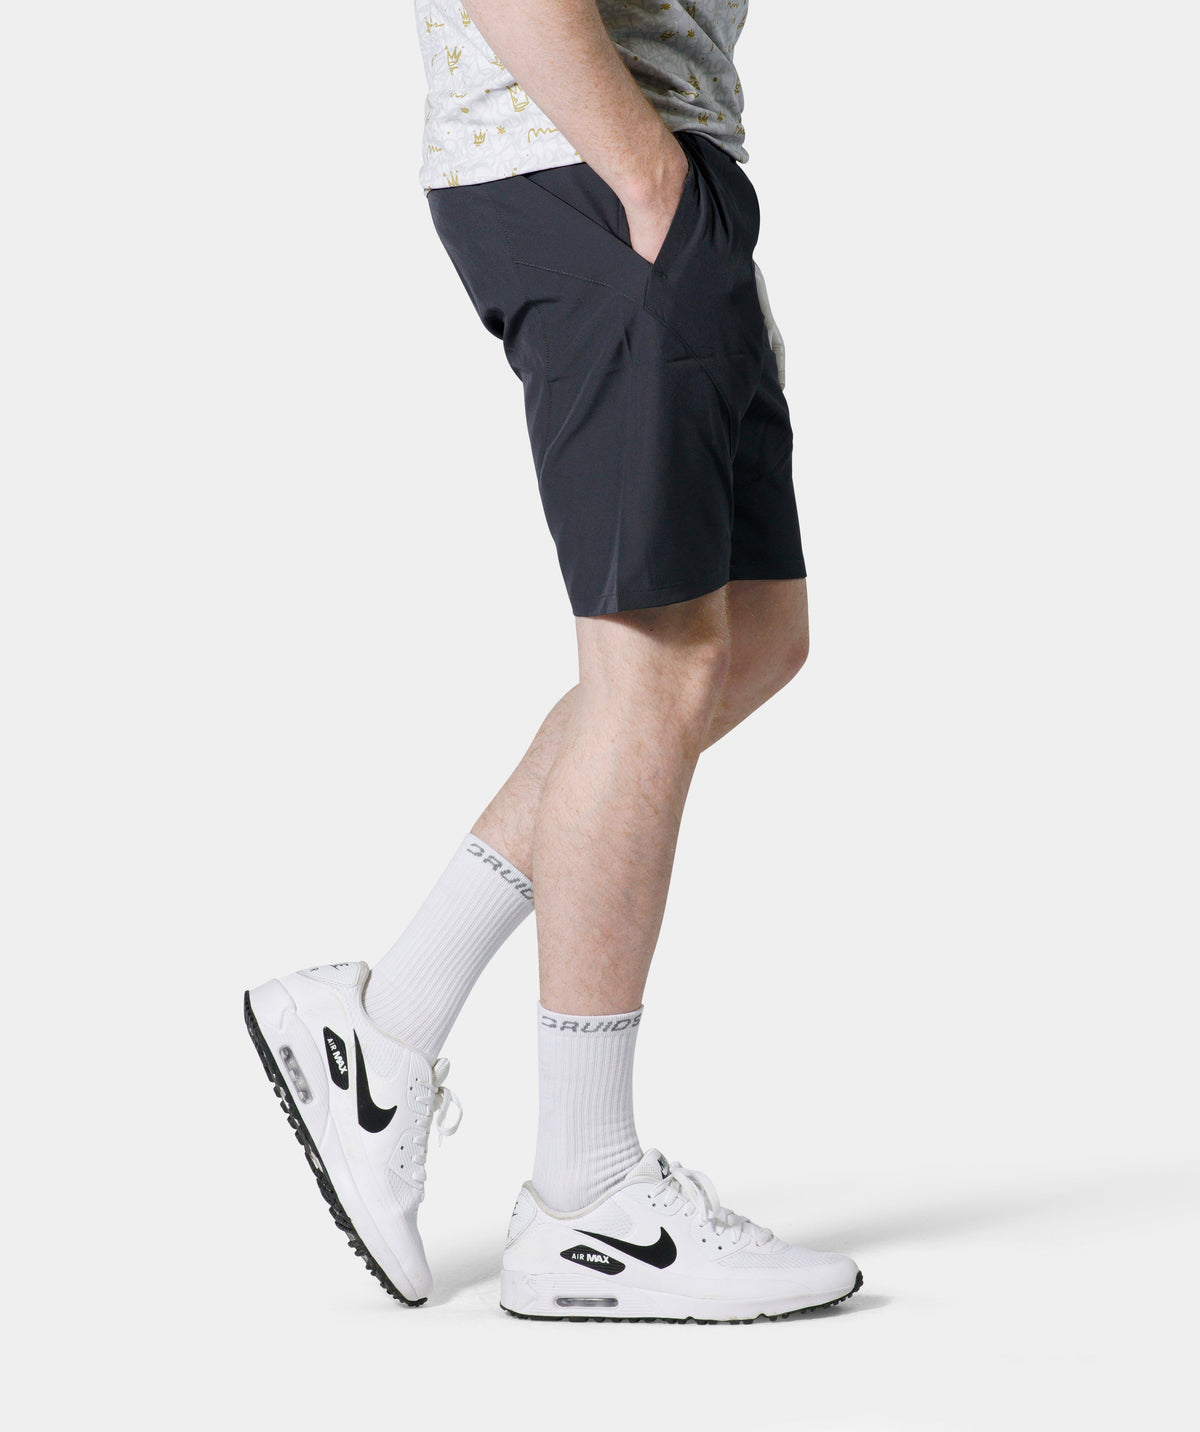 LUXE GOLF SHORTS - CHARCOAL